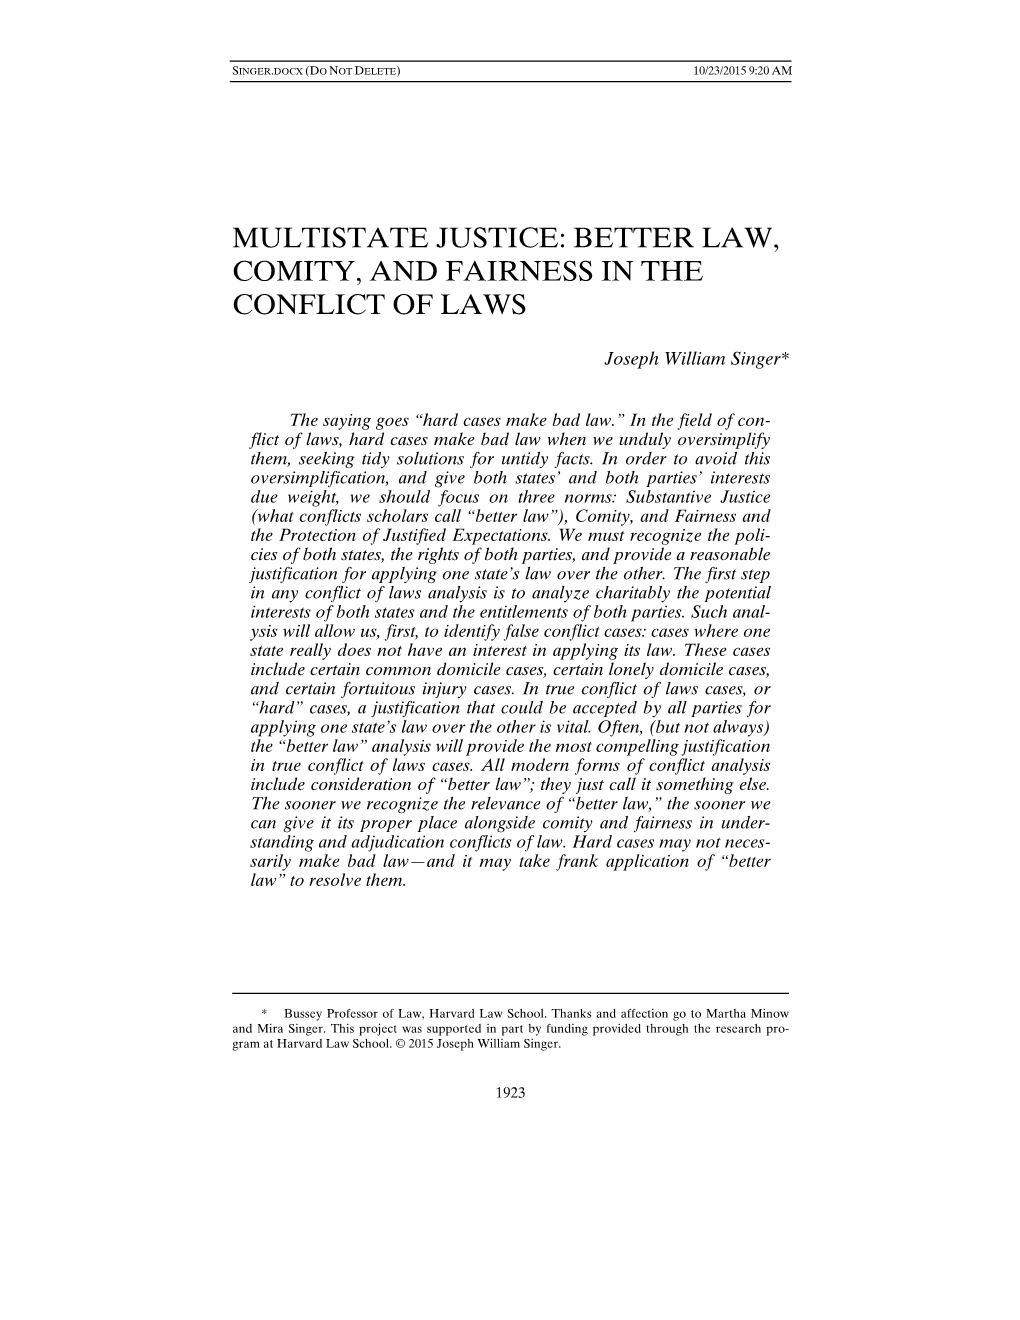 Better Law, Comity, and Fairness in the Conflict of Laws